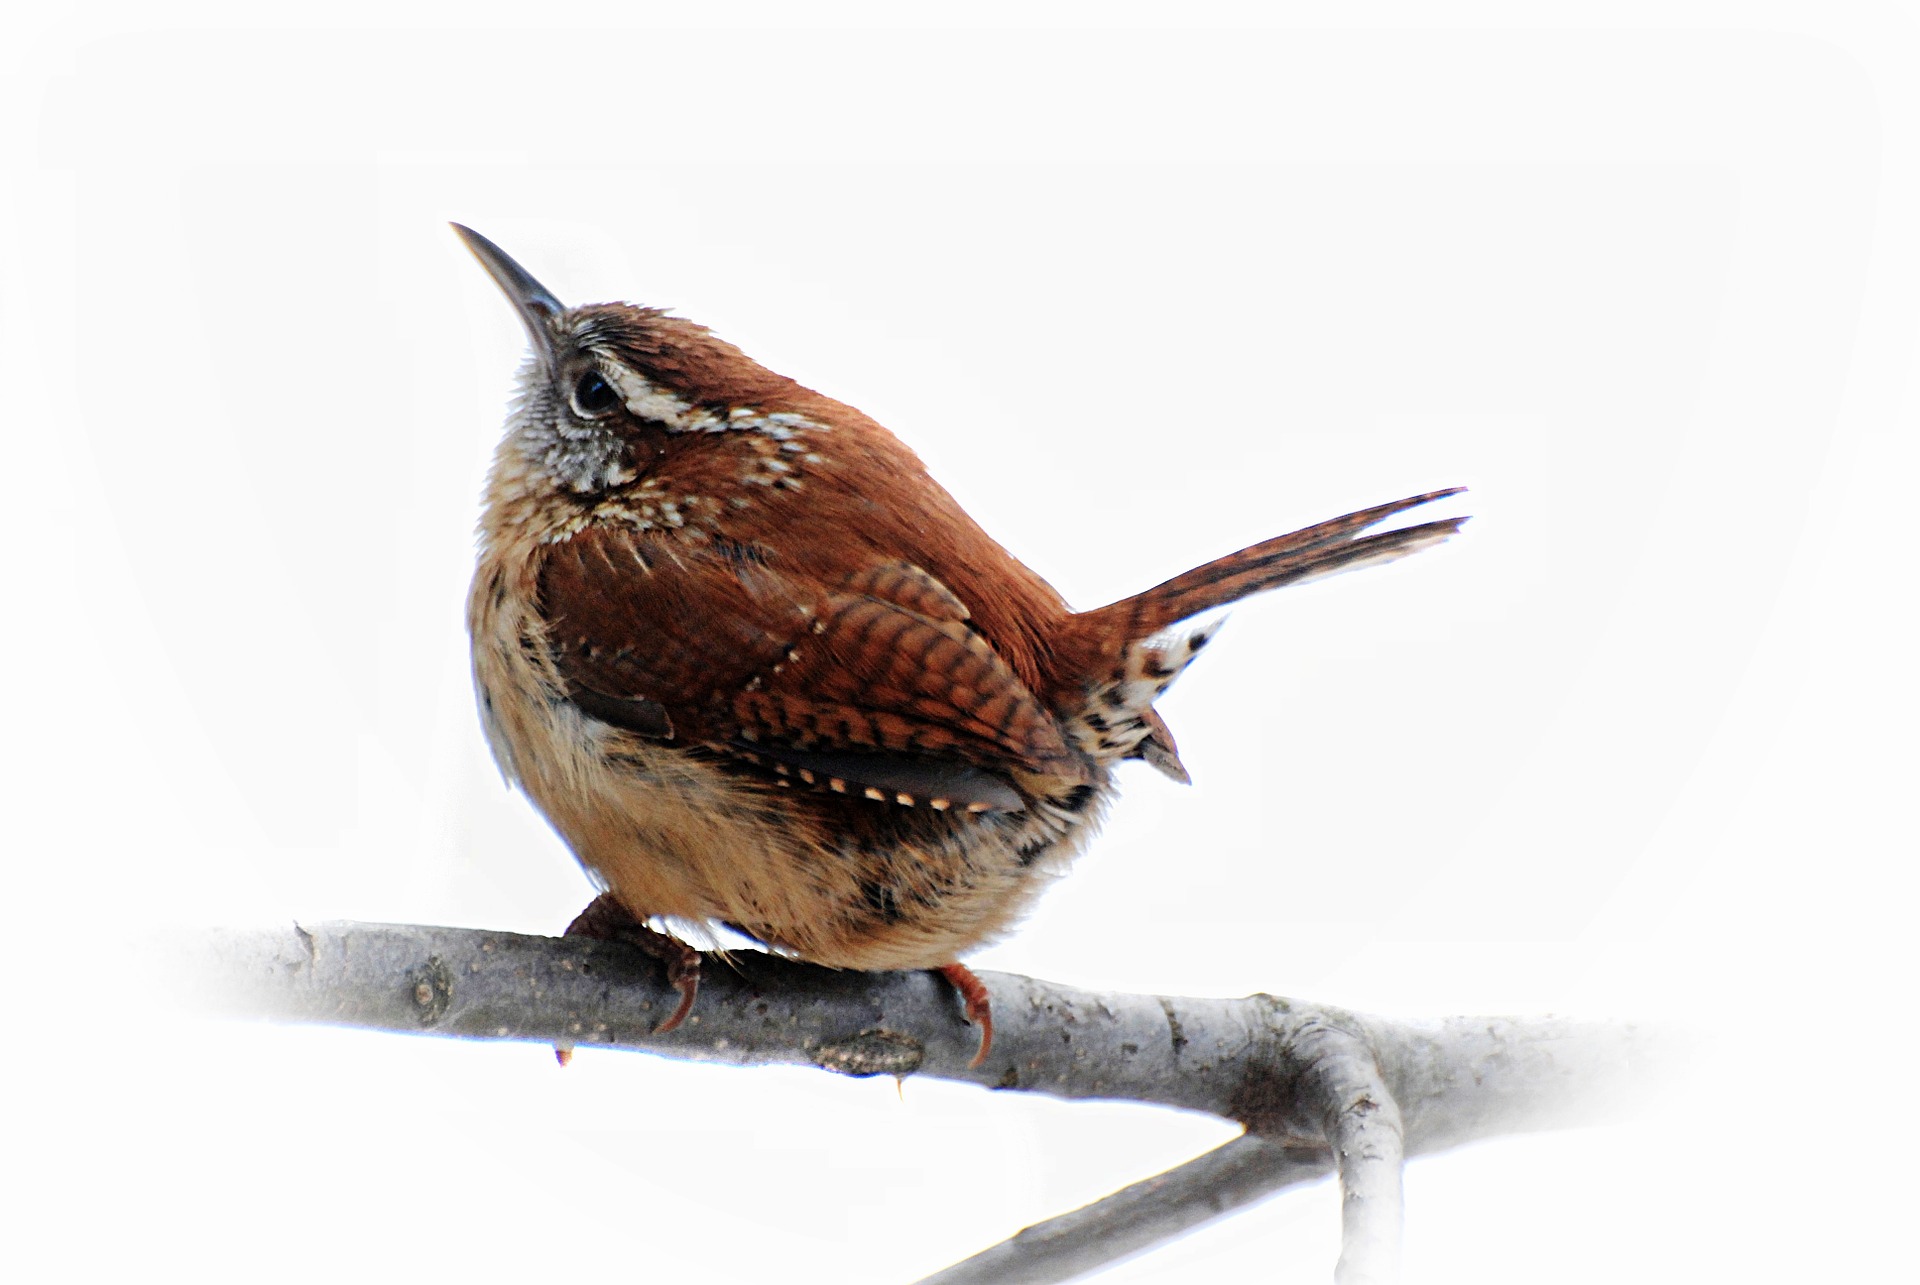 bewick's wren - types of wrens found in north america